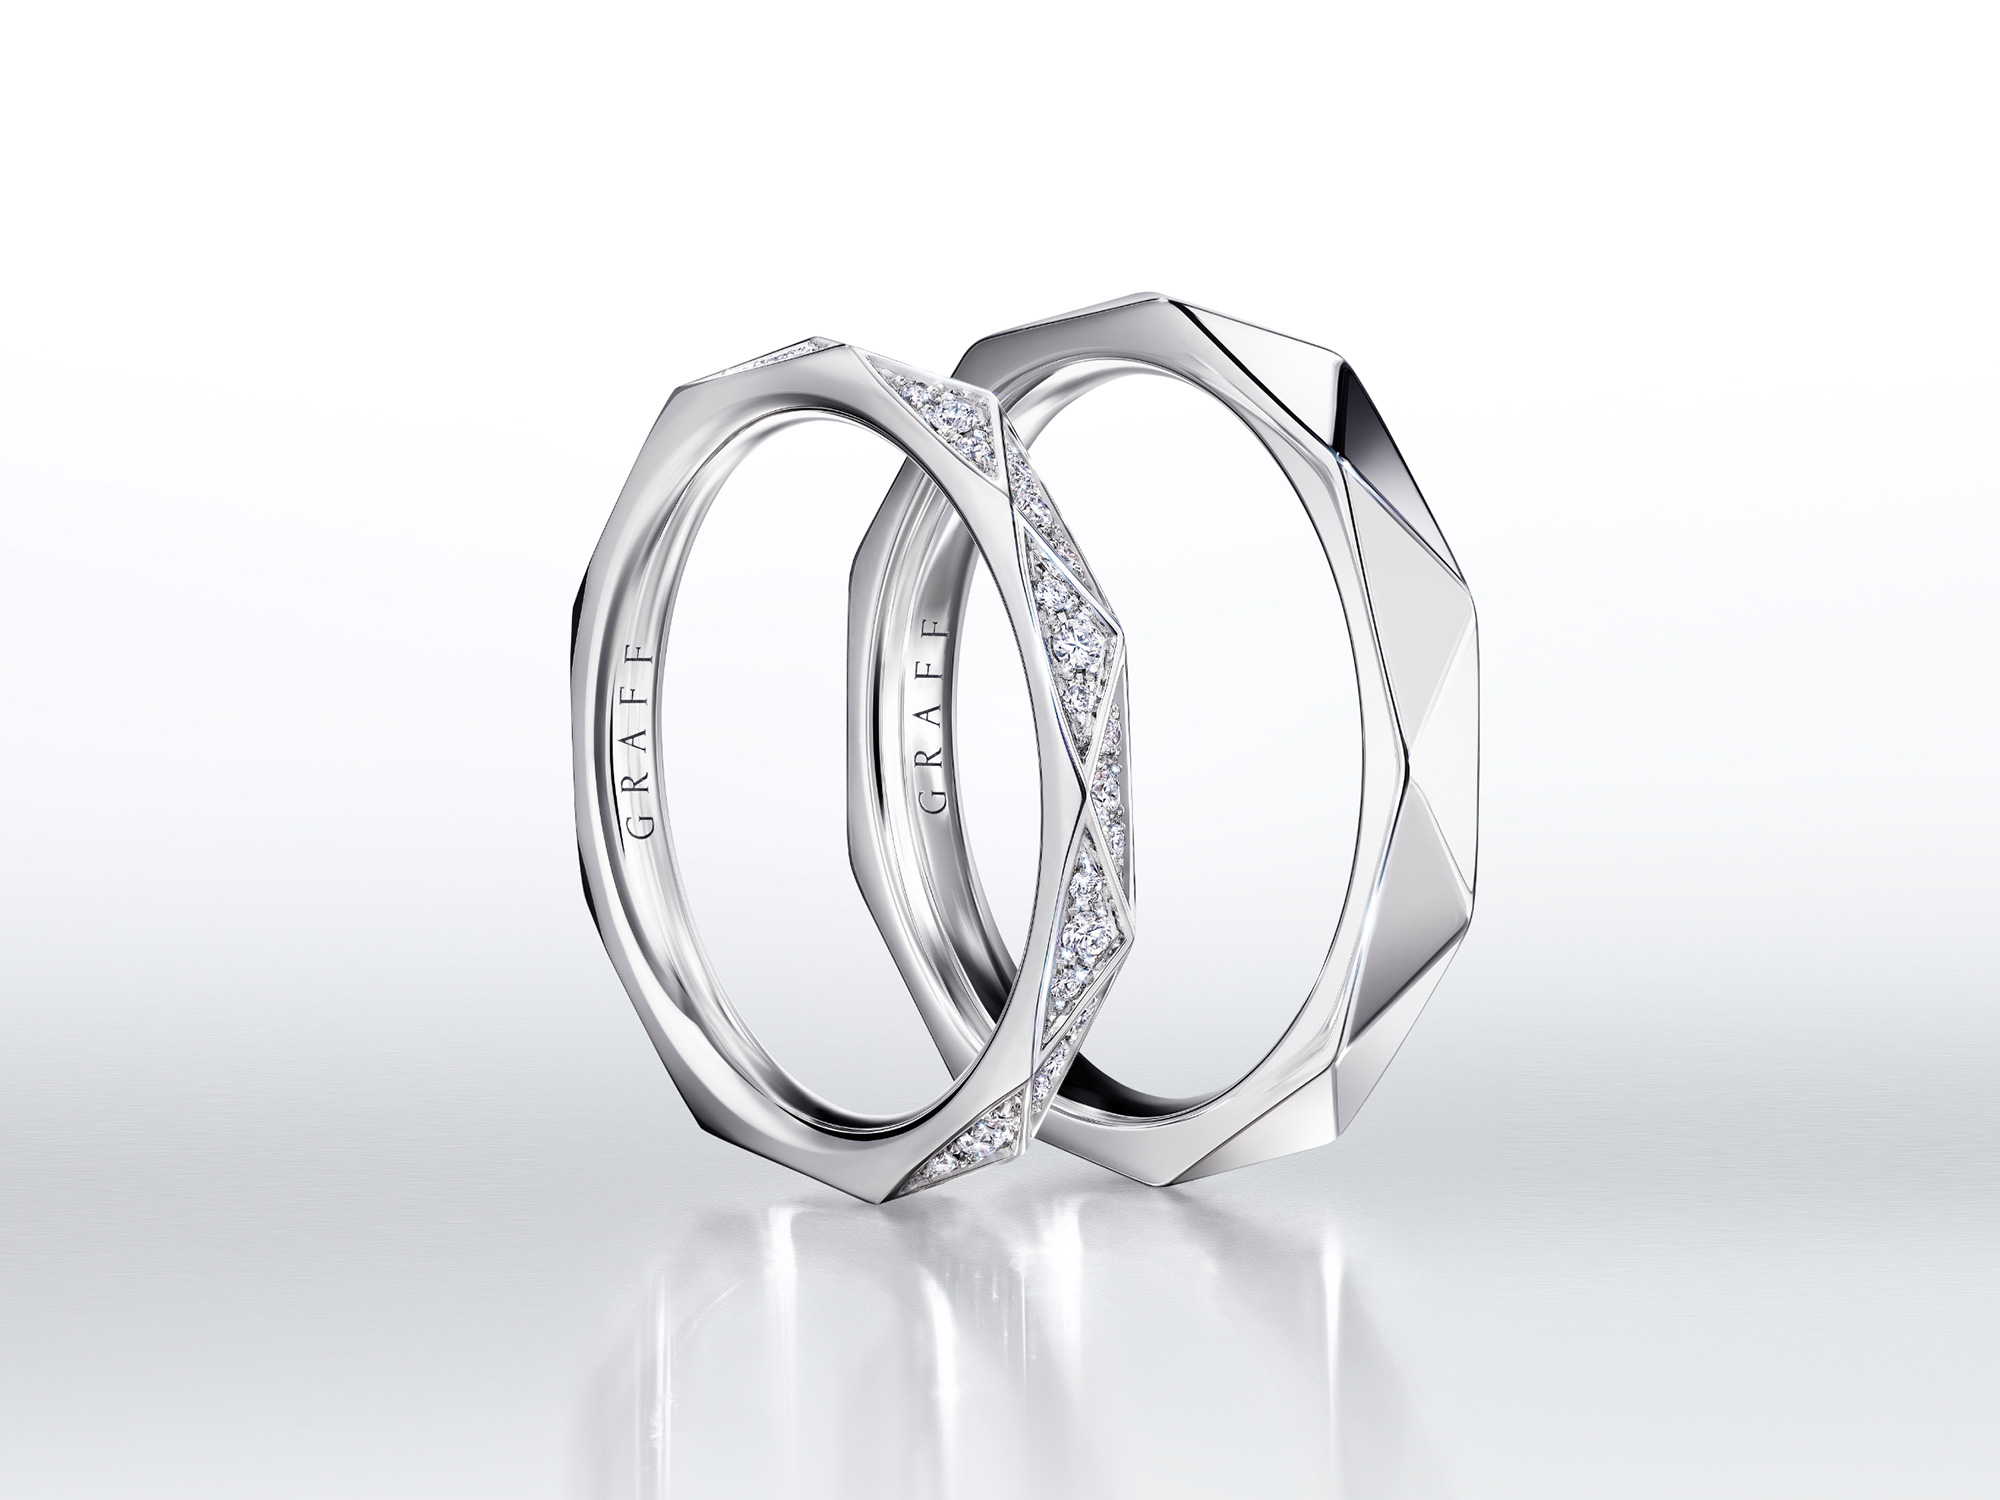 Pave diamond and plain Laurence Graff Signature bands in white gold